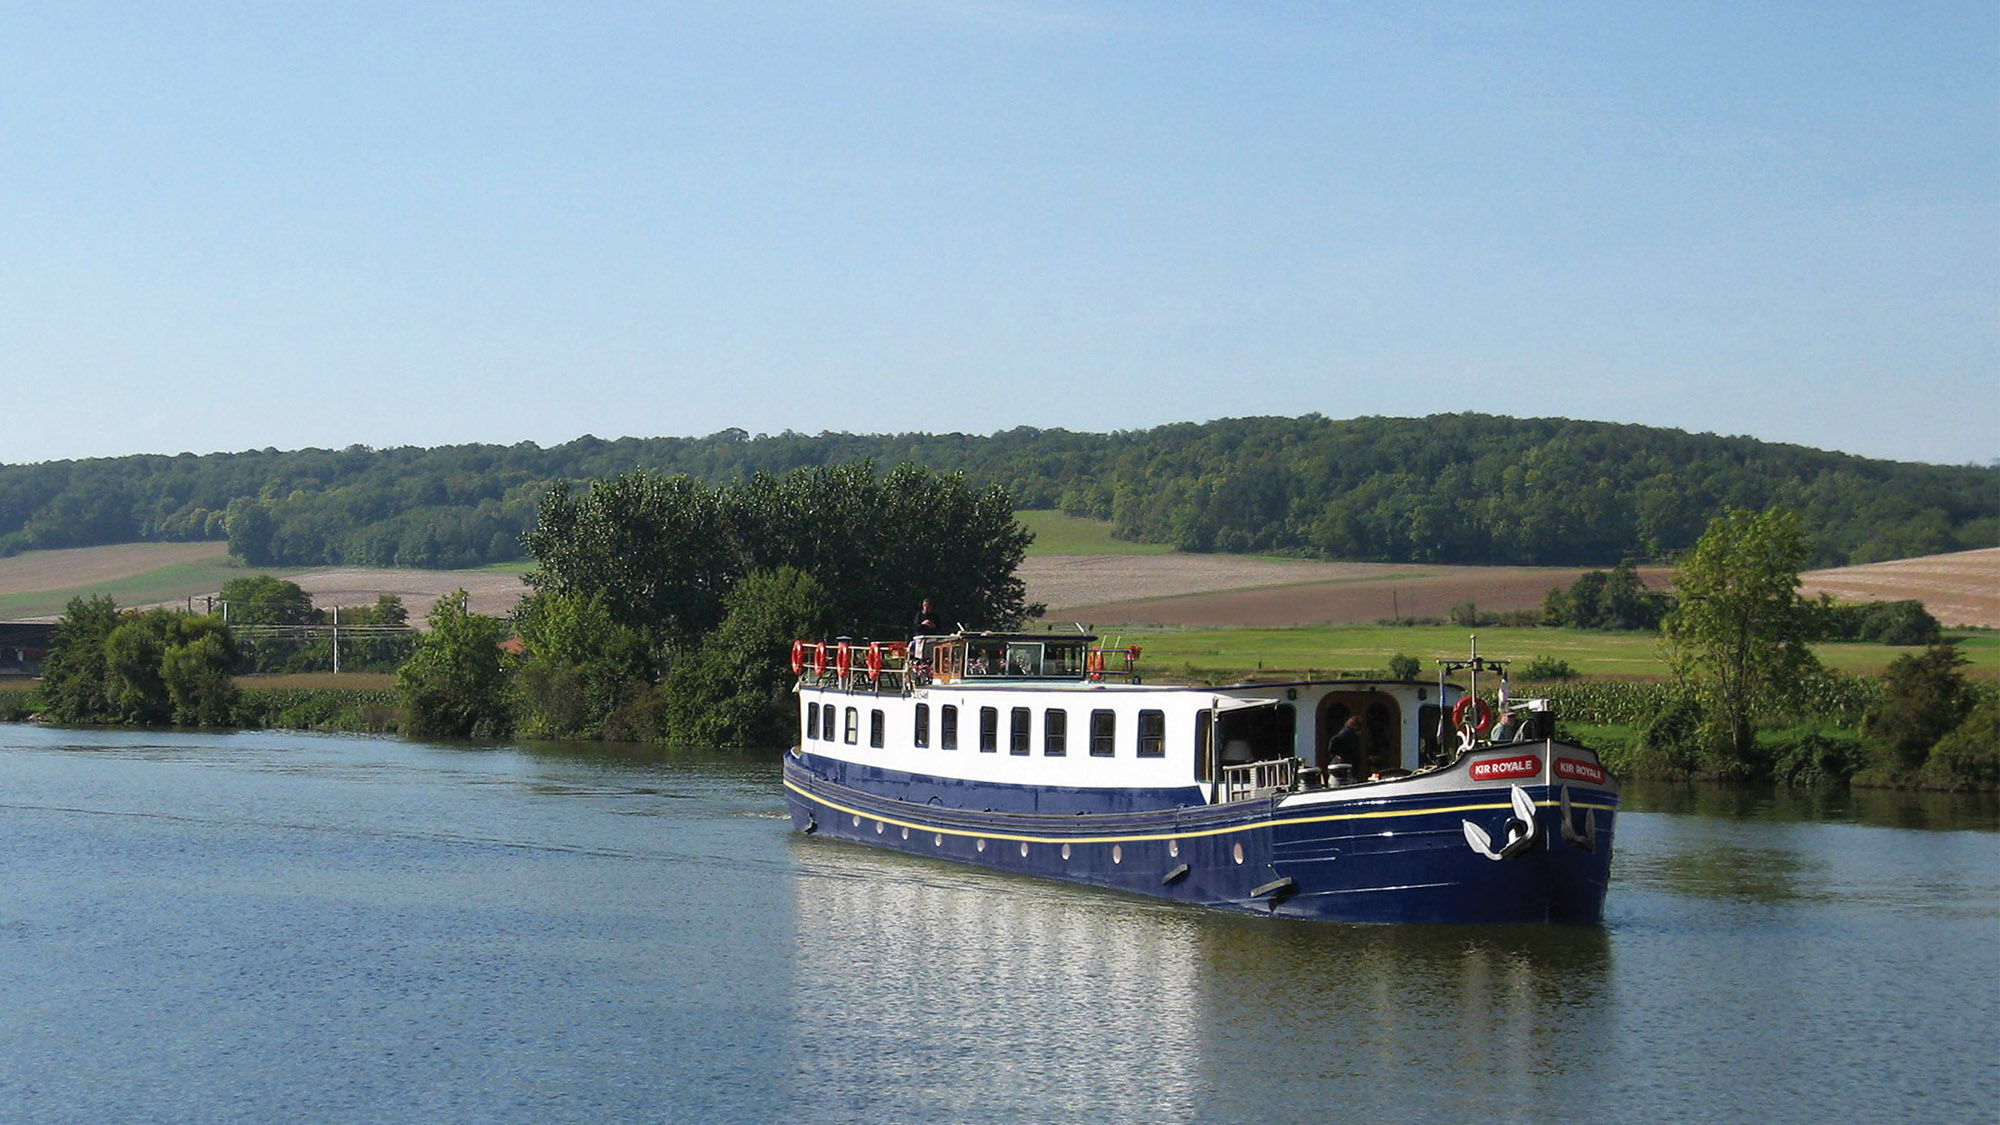 The Kir Royale canal barge.